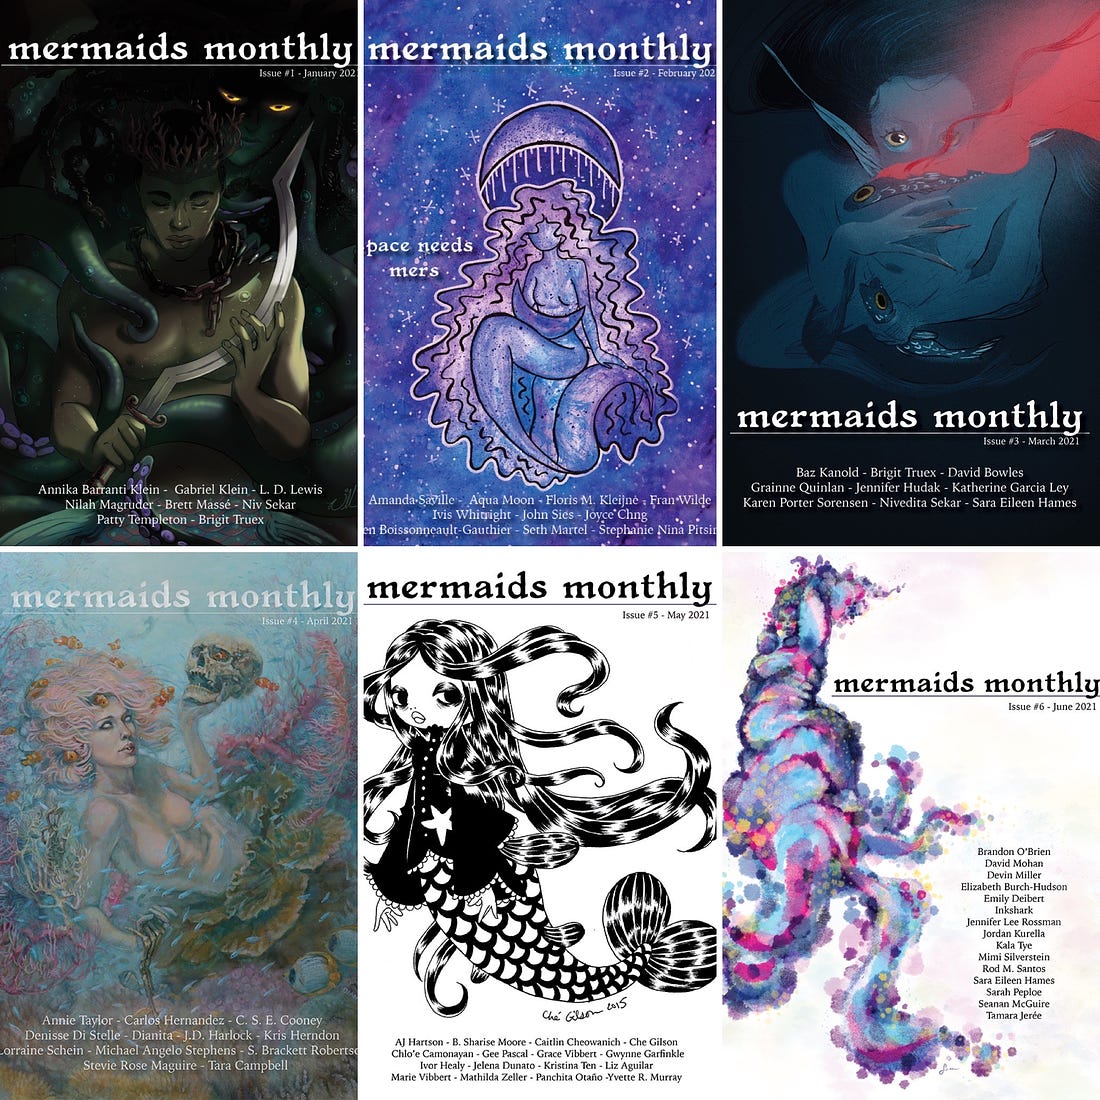 The first six covers of Merrmaids Monthly for 2021, arranged in a grid